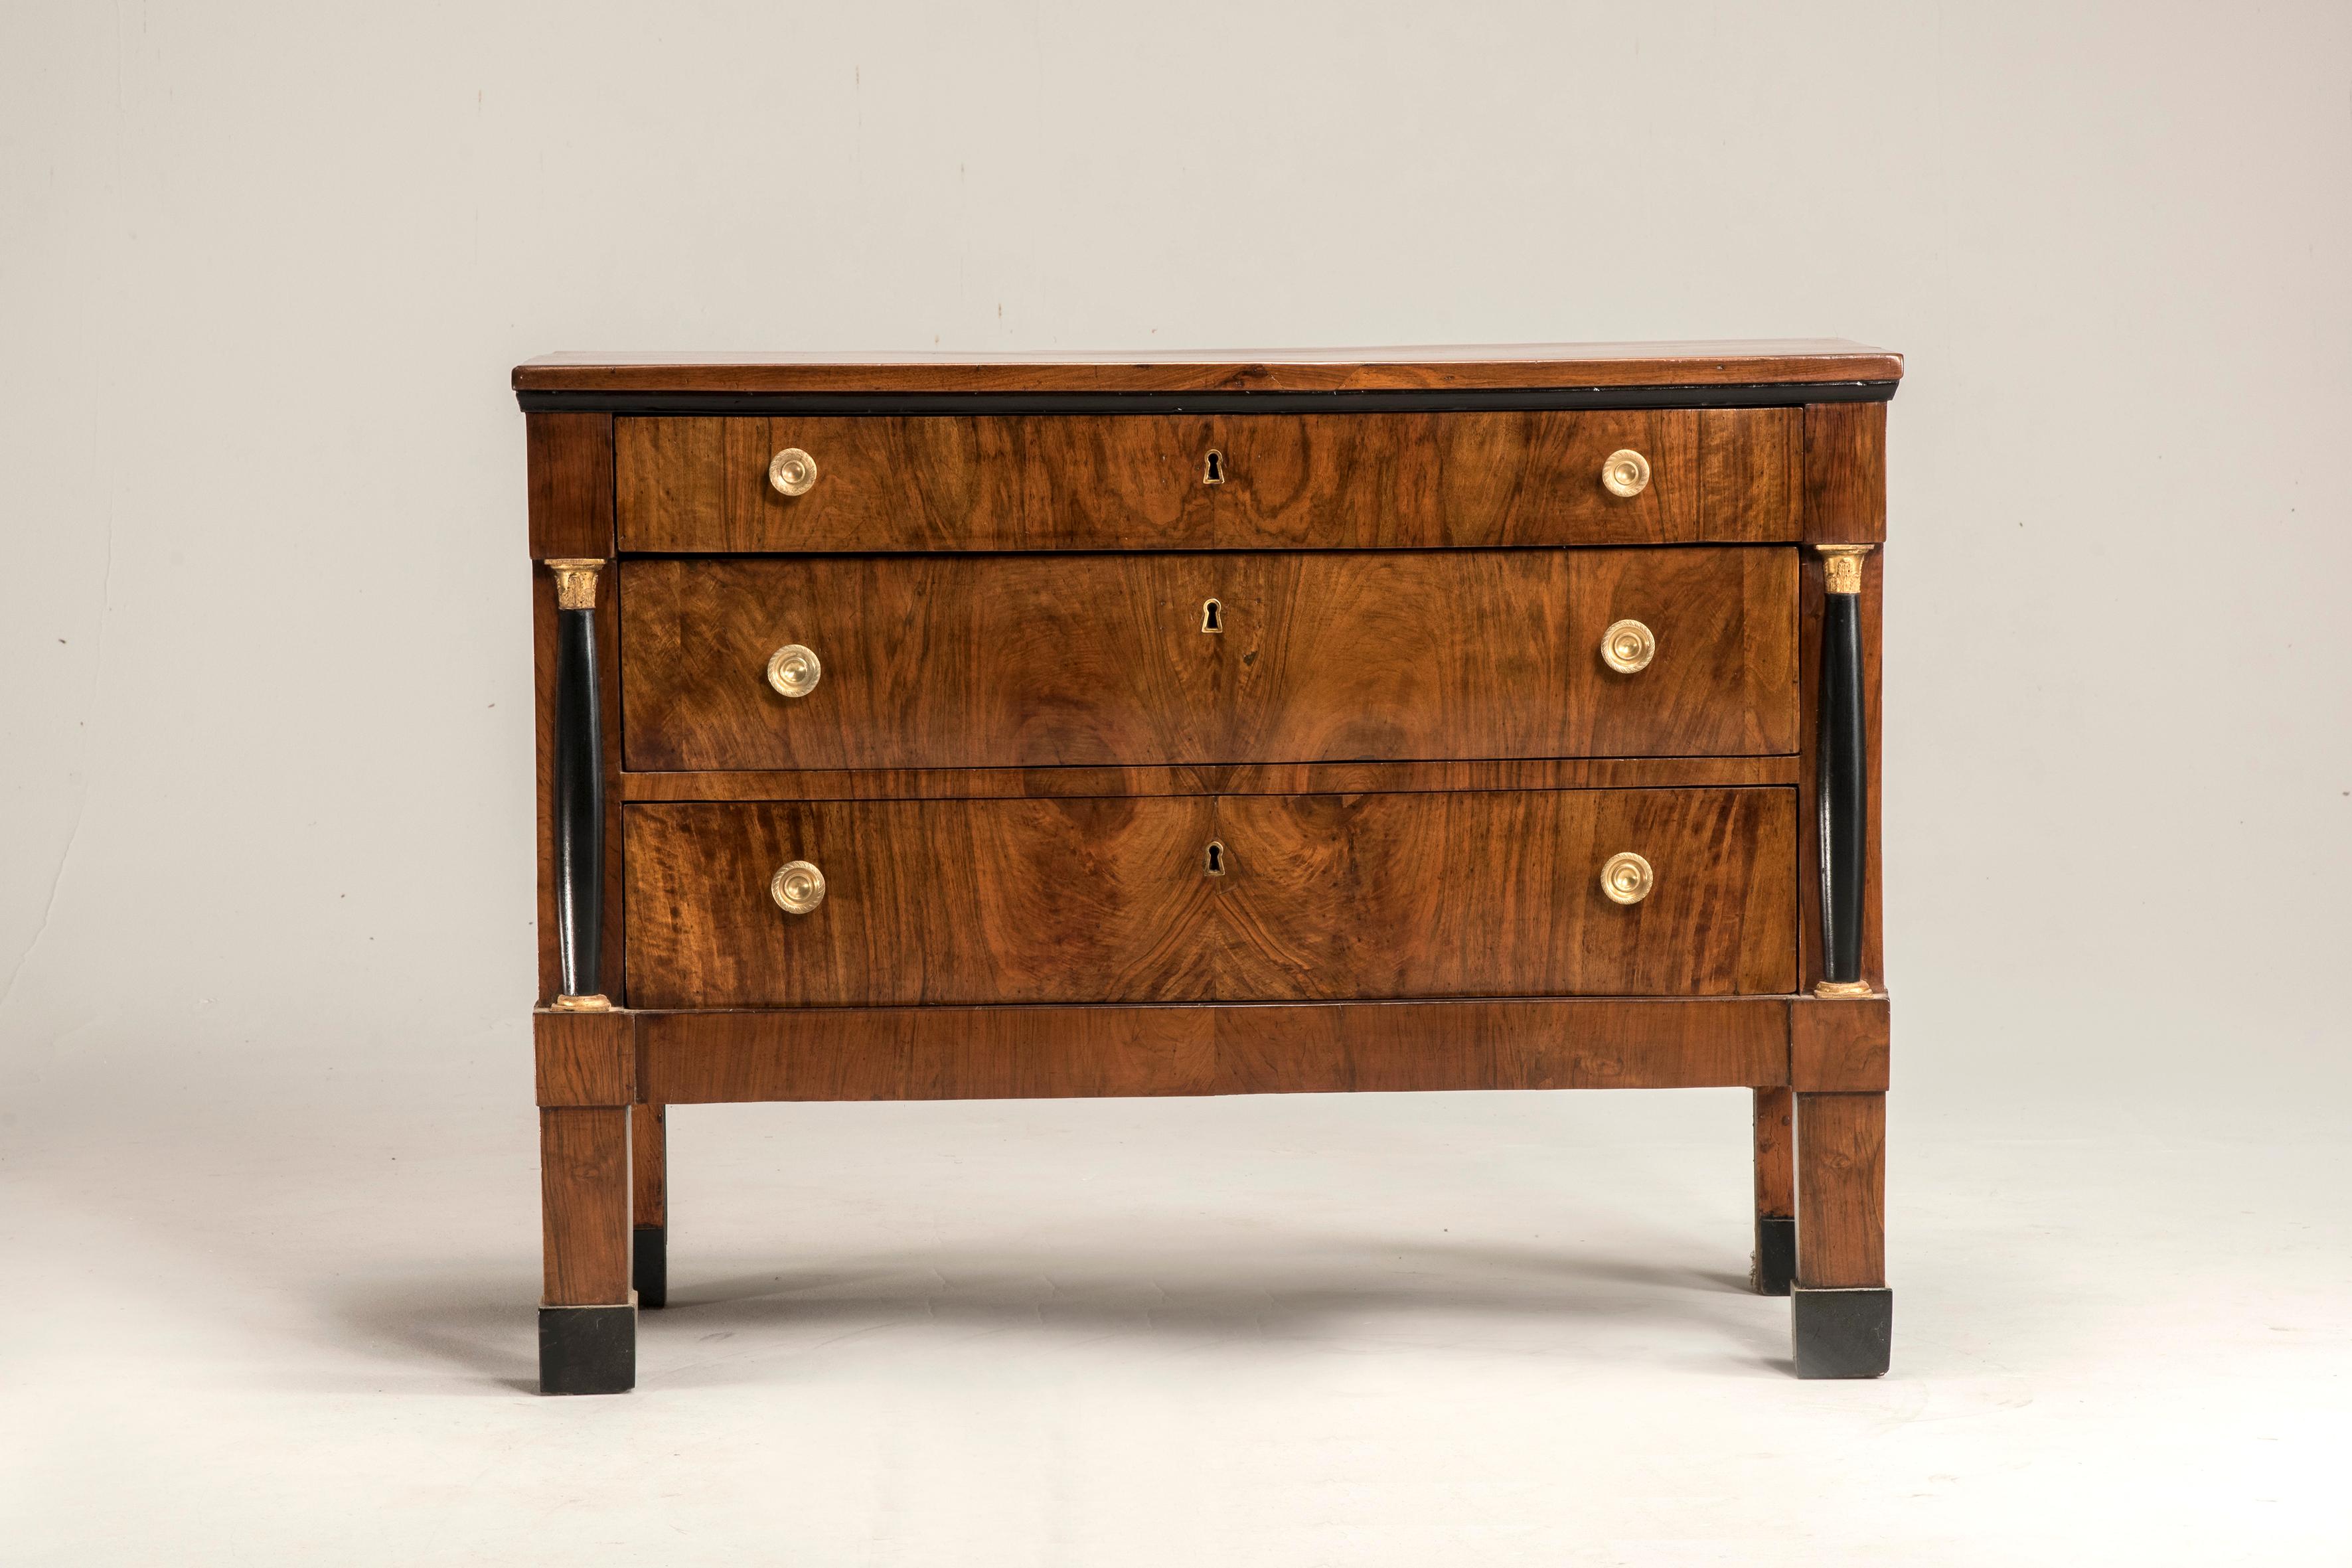 19th Century, 1810 circa Italian Empire Walnut Wood Chest of Drawers. This piece of furniture is veneered with walnut. It is from Italy from Veneto region. It features gilt wood capitals and black lacquered columns, original lockers and coeval